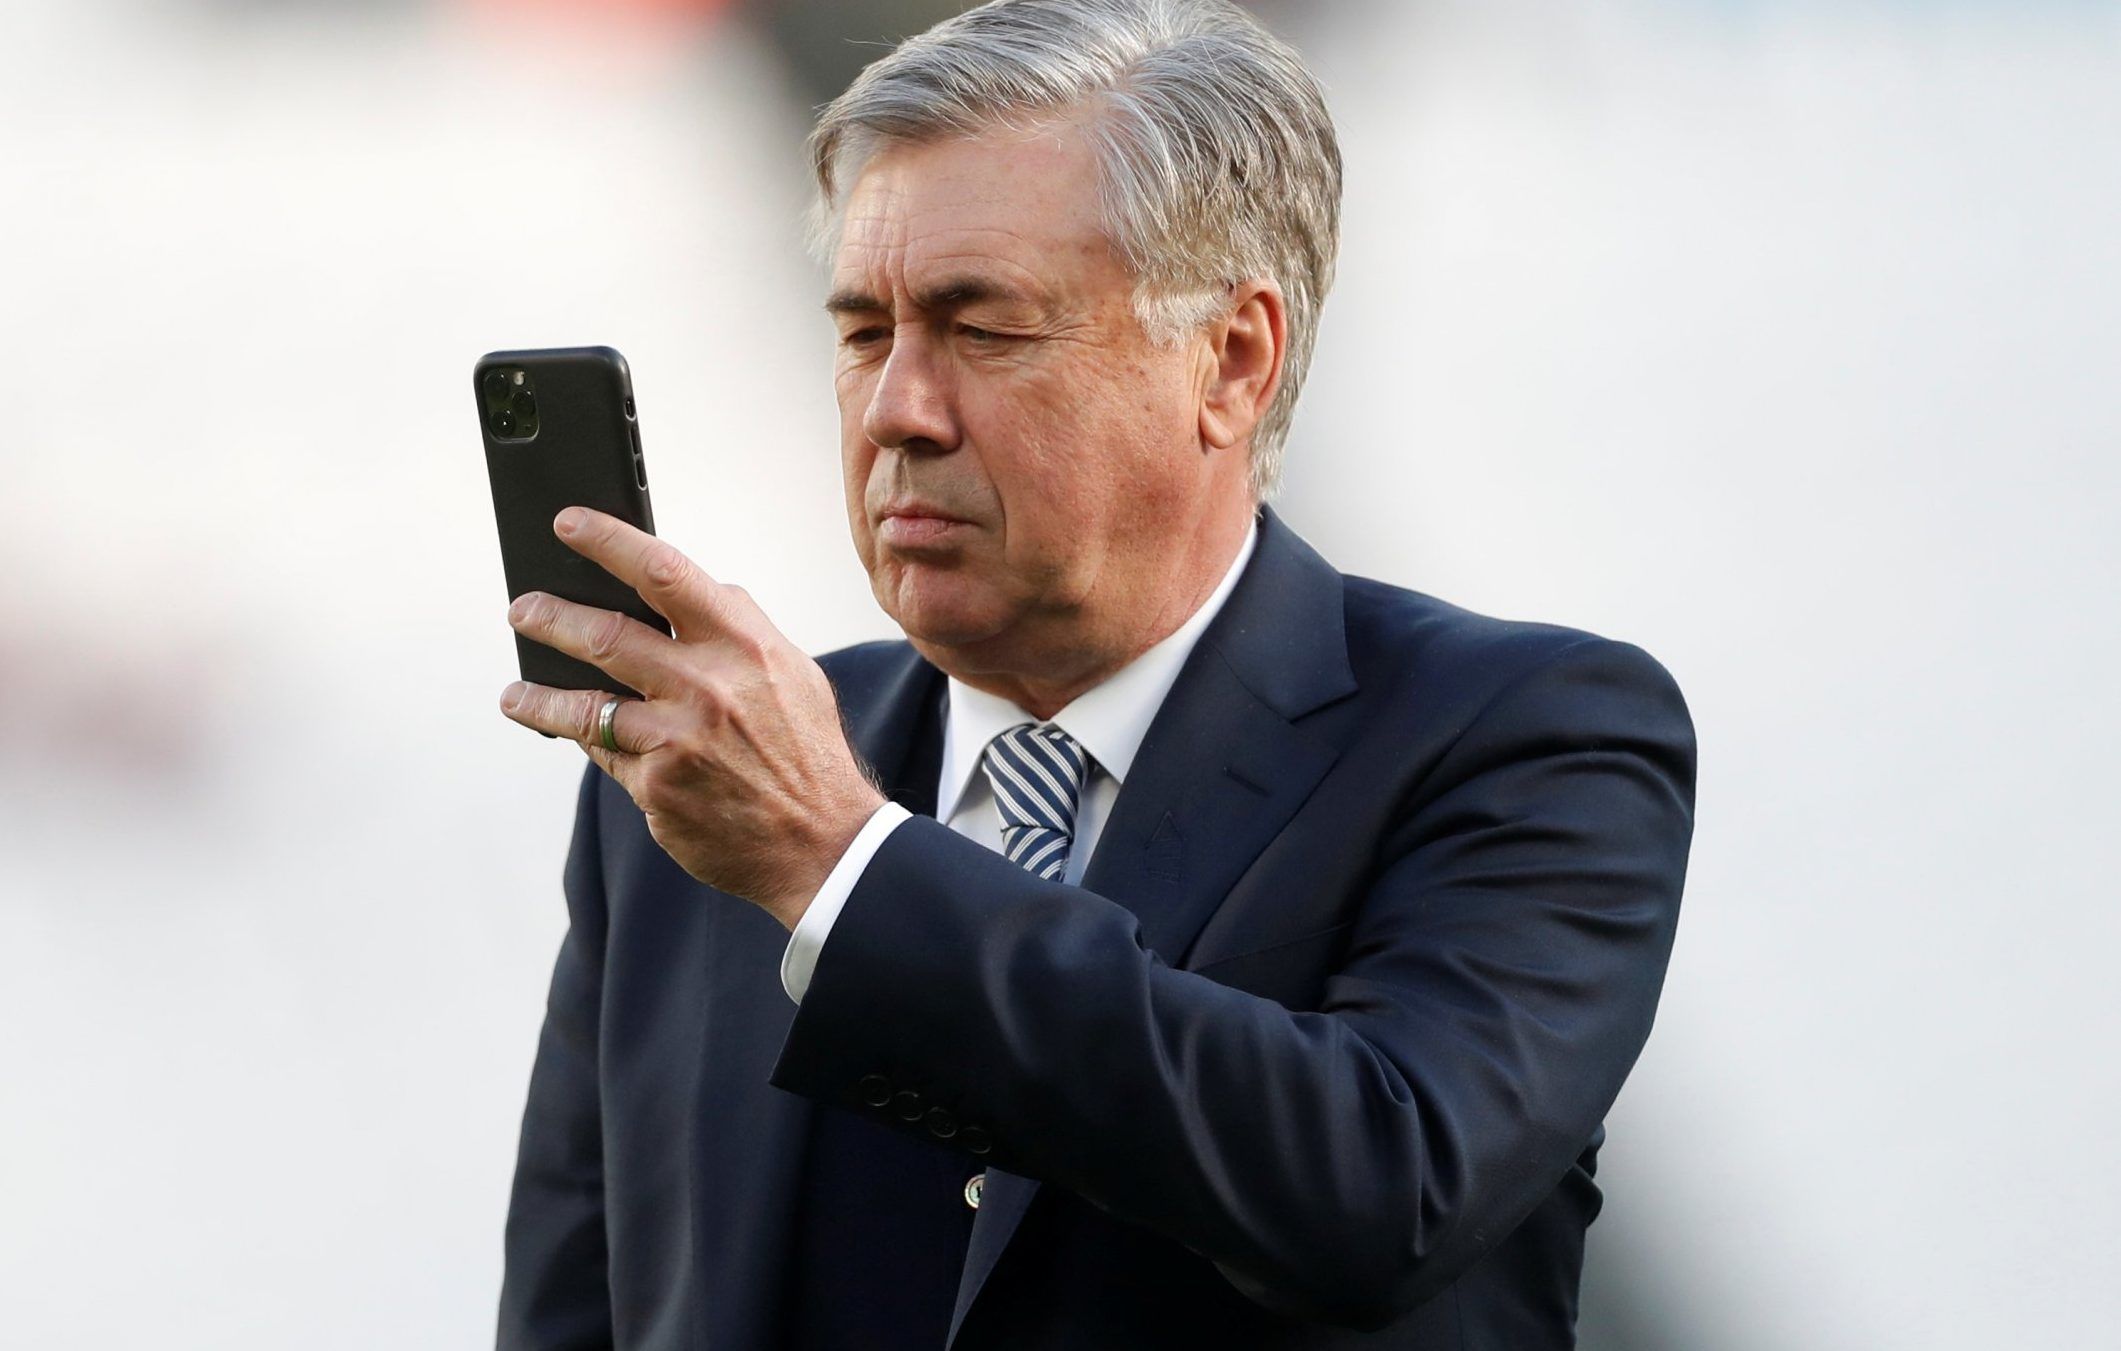 Everton-manager-Carlo-Ancelotti-looks-at-phone-before-West-Ham-game-e1579606767988.jpg